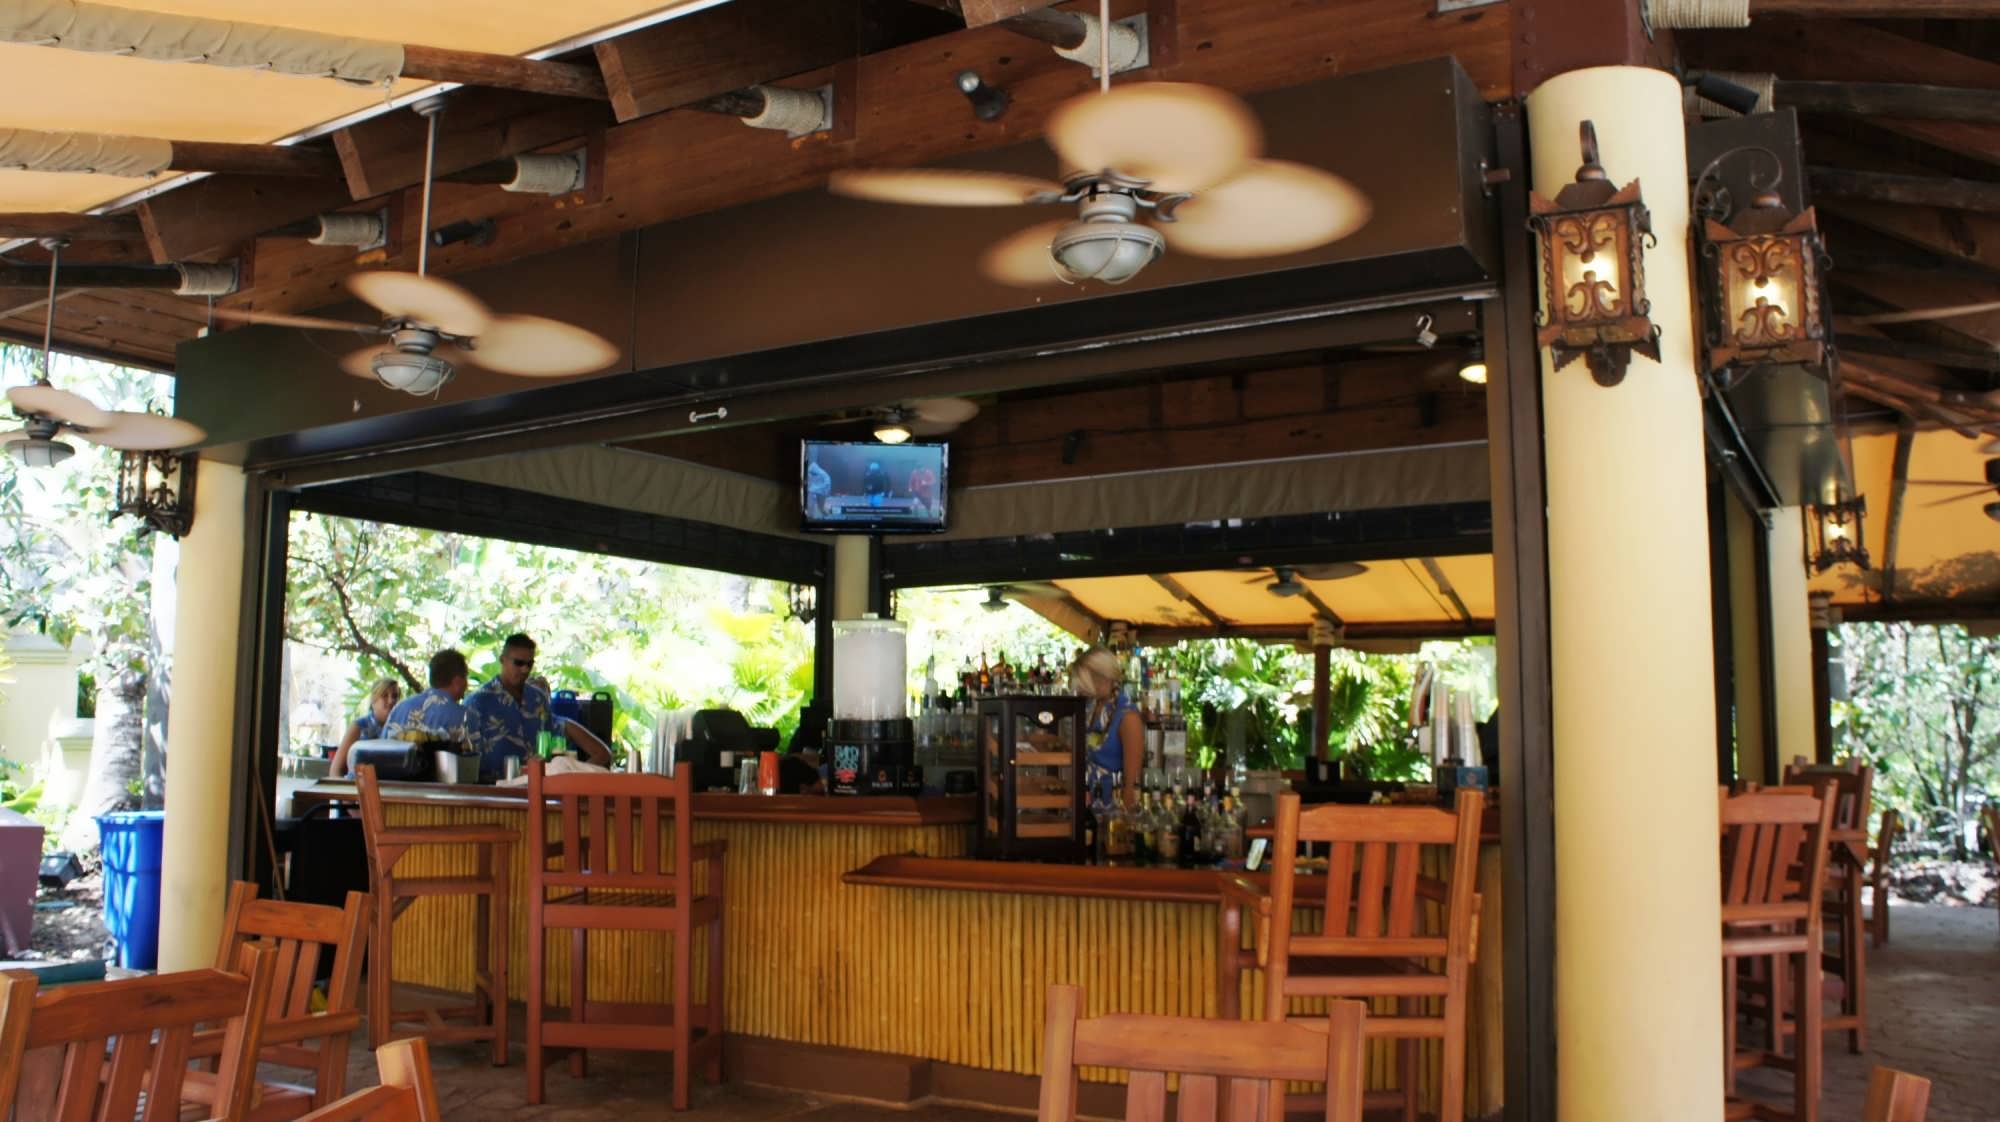 Ceiling fans cool of guests of the Bula Bar & Grille at Royal Pacific Resort